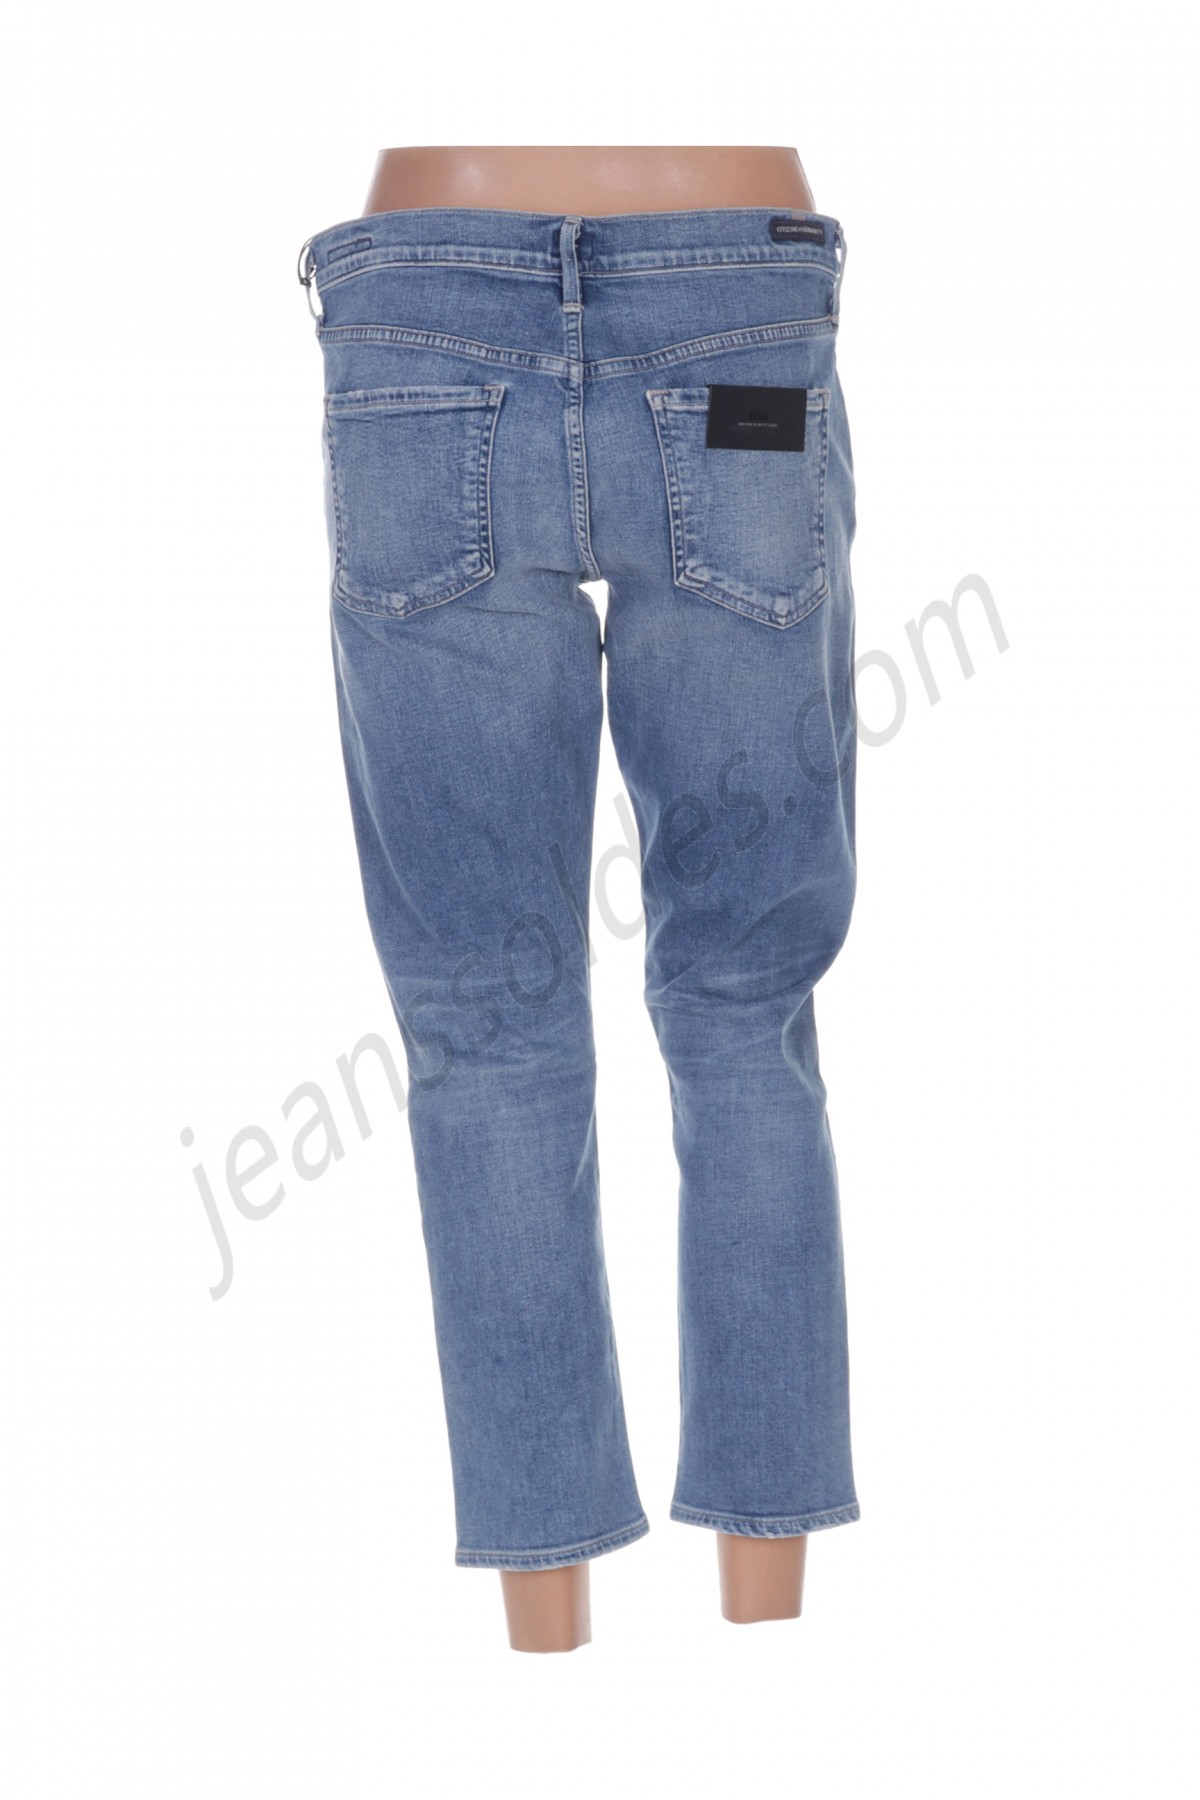 citizens of humanity-Jeans coupe slim prix d’amis - -1